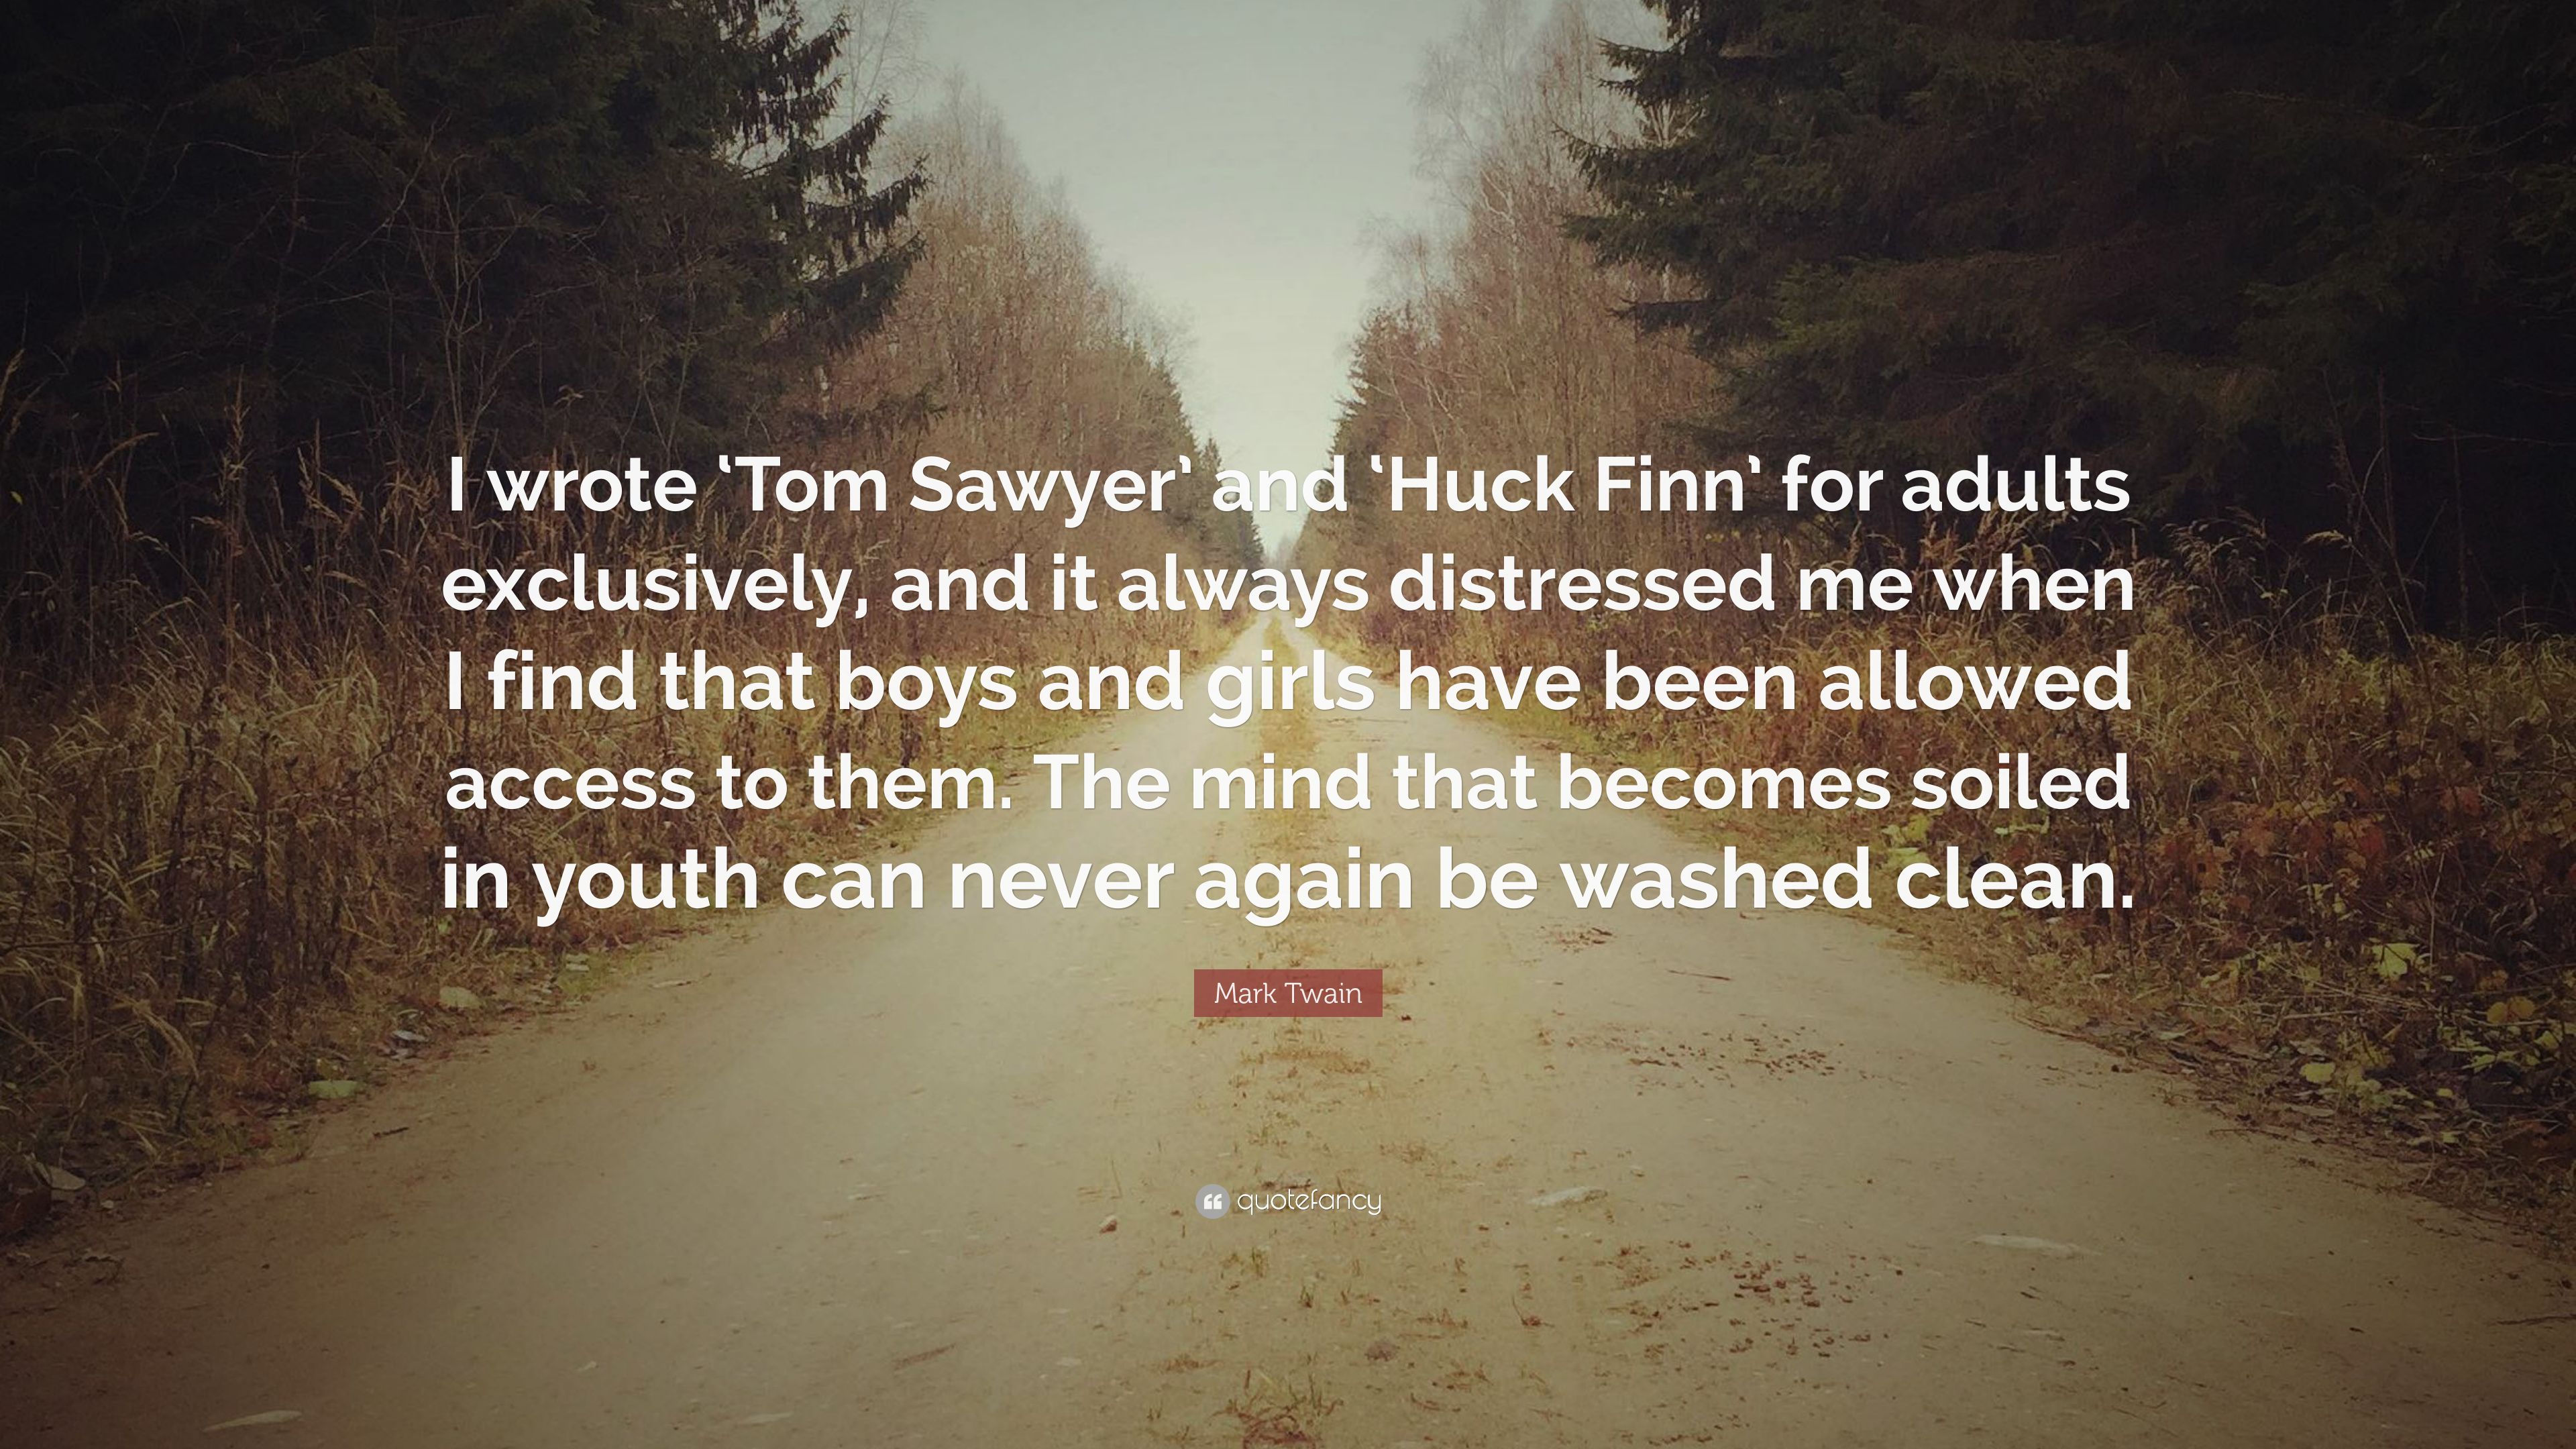 Mark Twain Quote: “I wrote 'Tom Sawyer' and 'Huck Finn' for adults exclusively, and it always distressed me when I find that boys and girls.” (7 wallpaper)